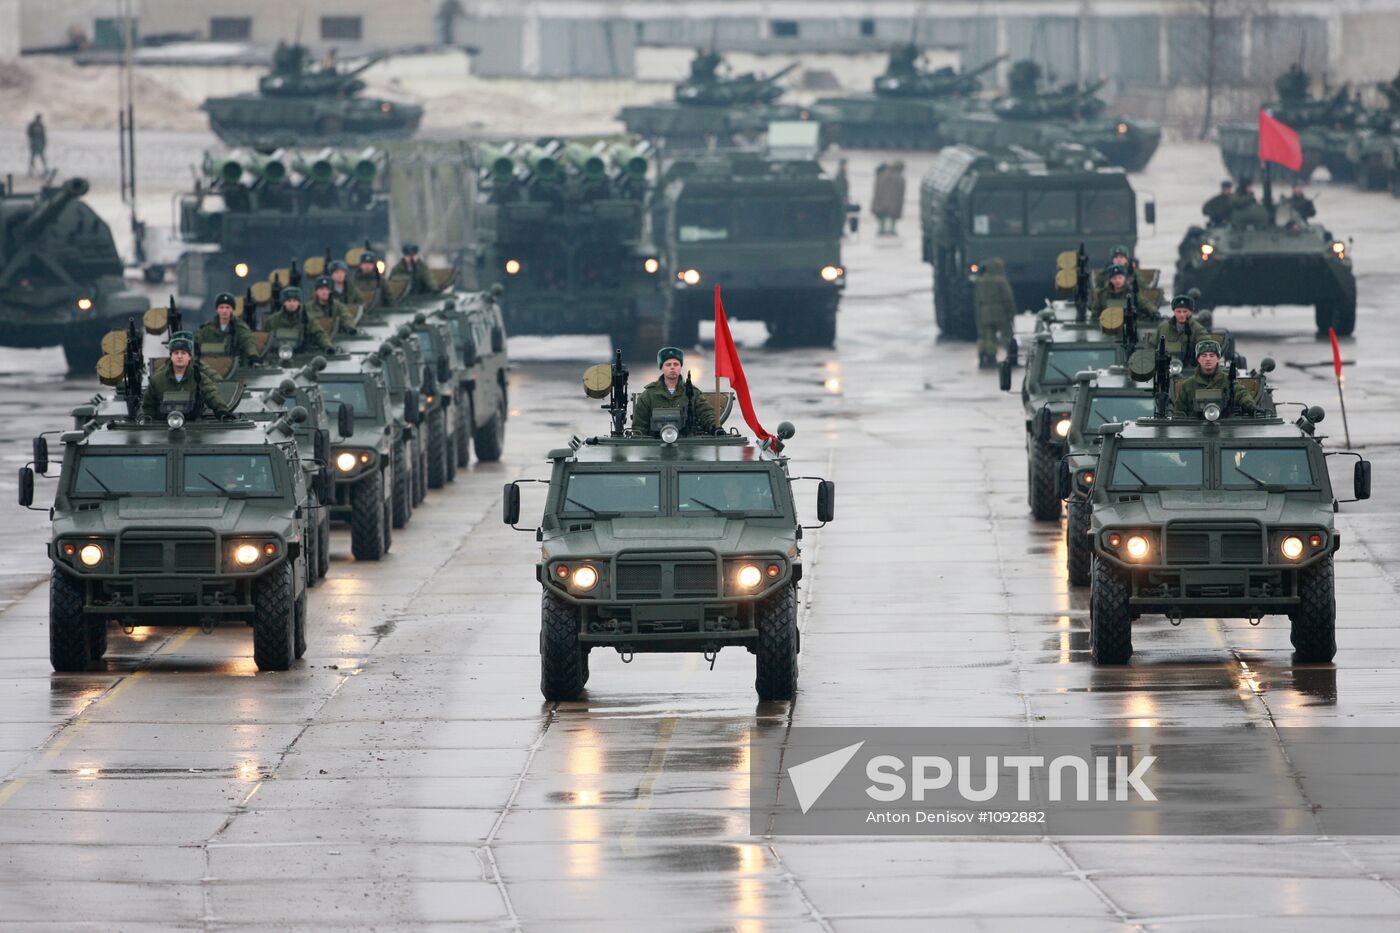 Rehearsal of Victory Day Parade in Alabino, Moscow Region